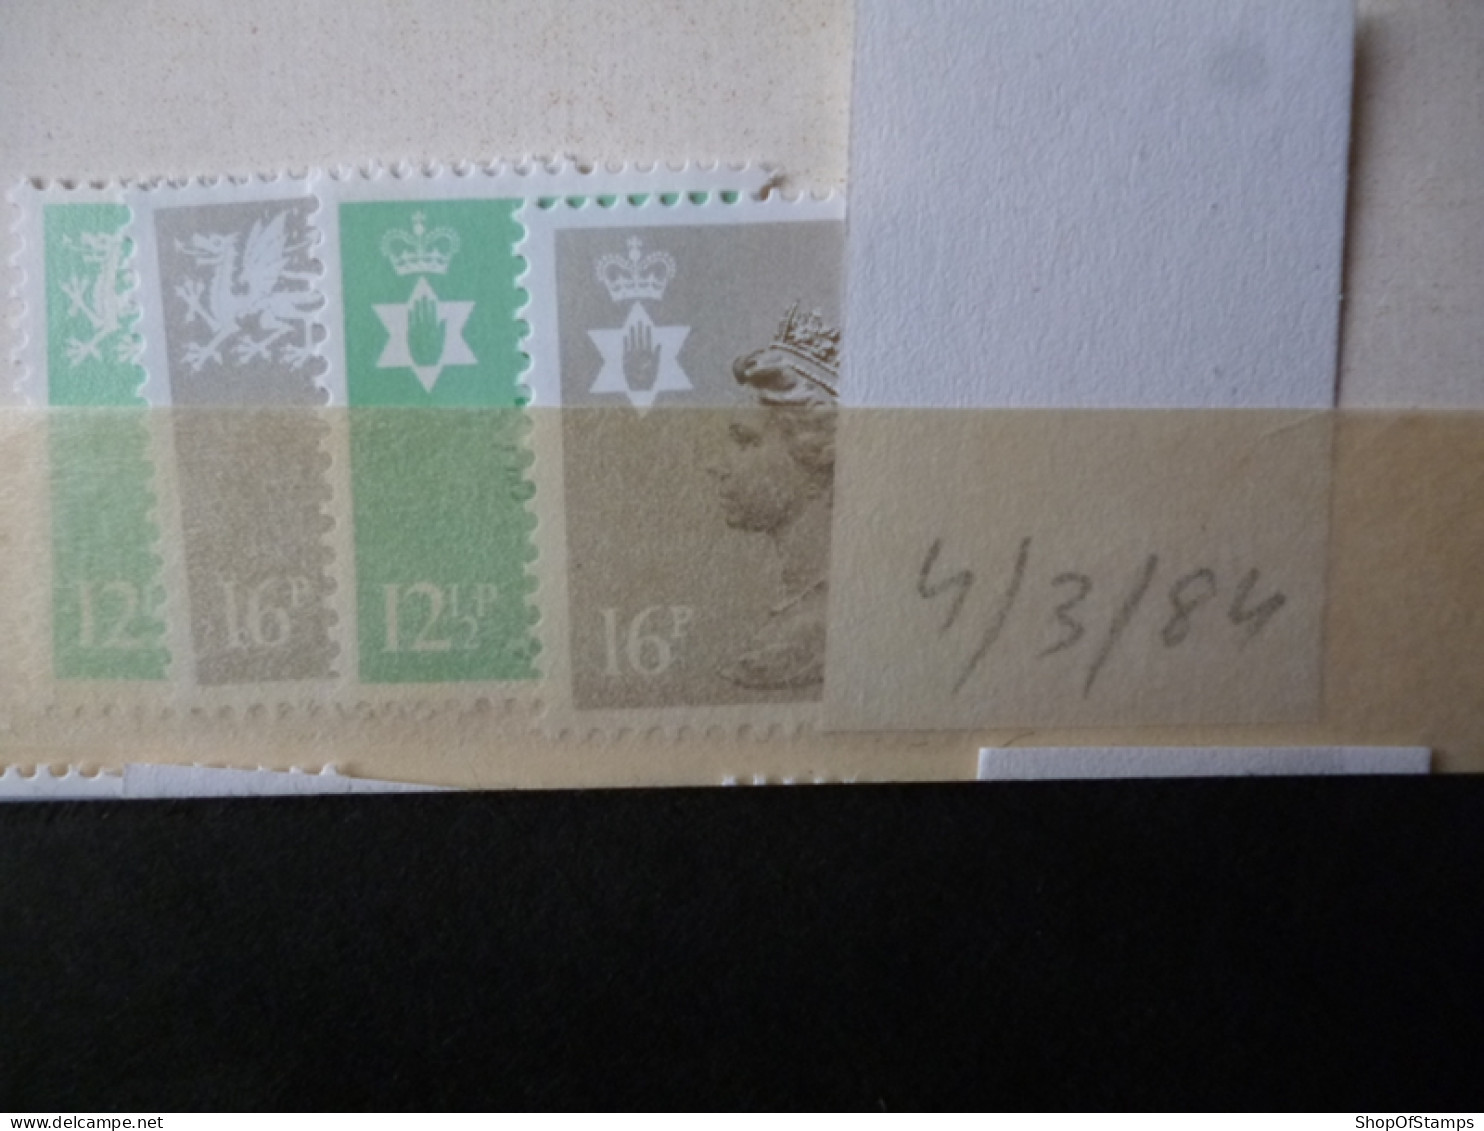 GREAT BRITAIN SG X 1984 28.2.84  MINT DEFI ISSUE FROM GPO IN ENVELOPE - Franking Machines (EMA)